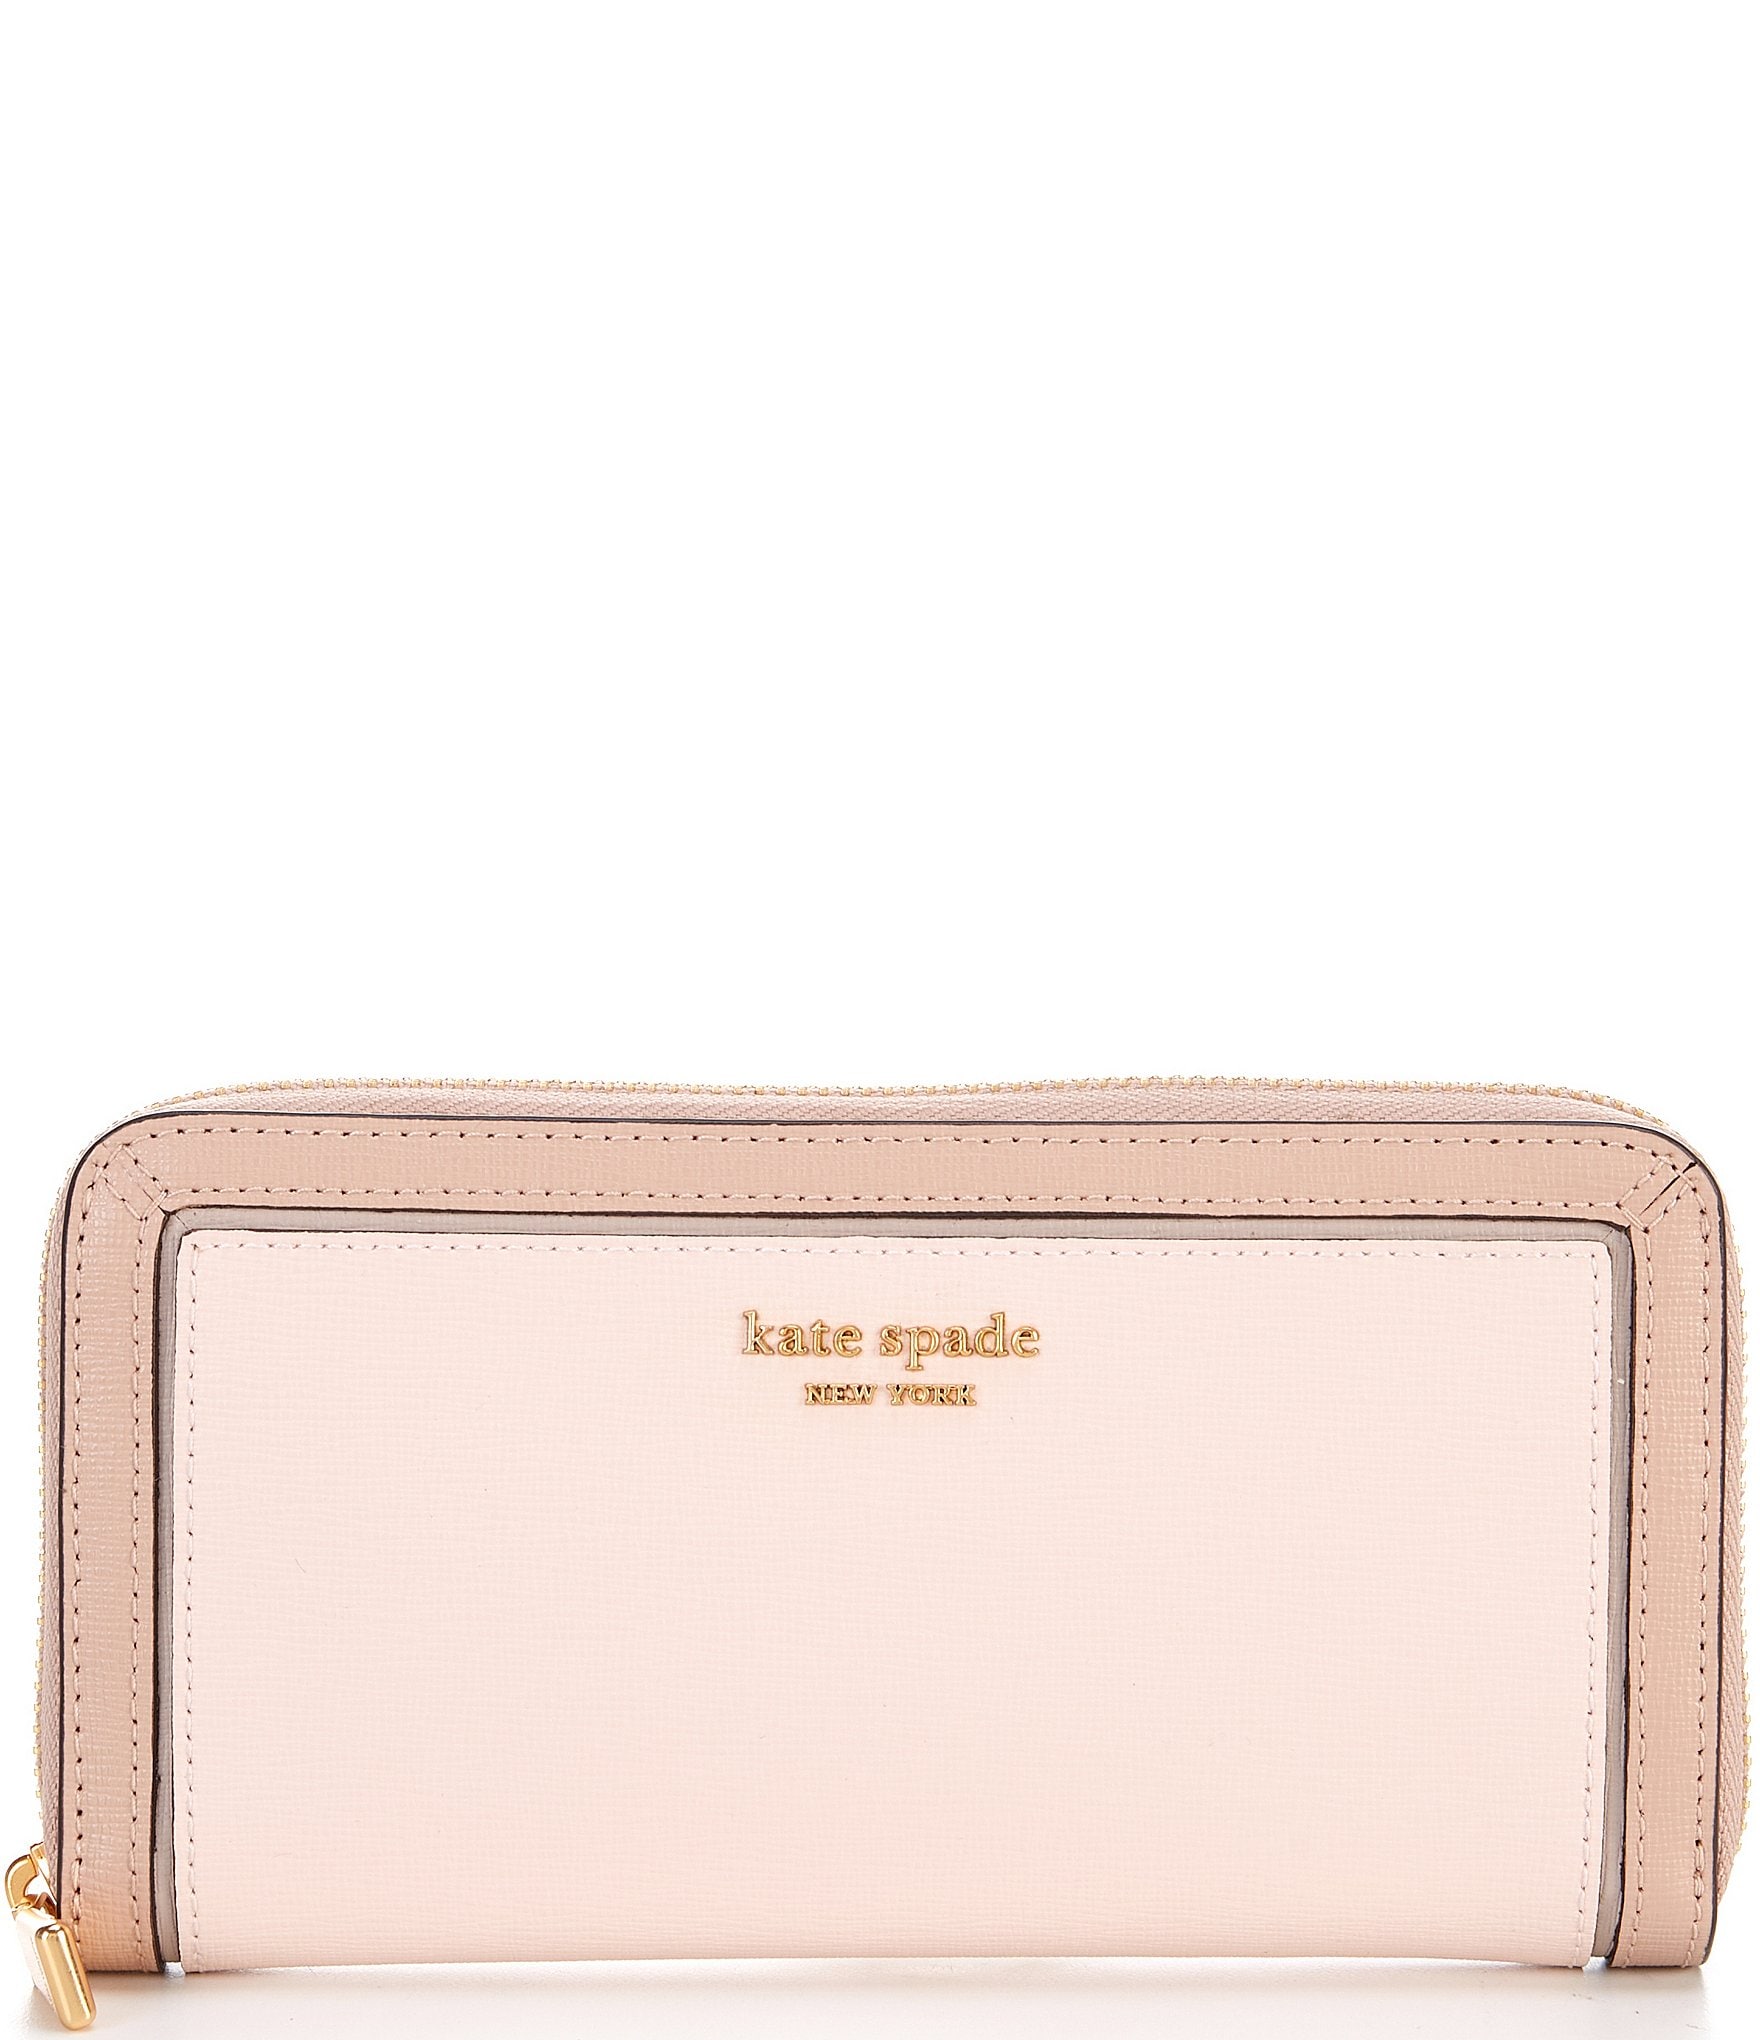 Kate spade new york Wallets For Women